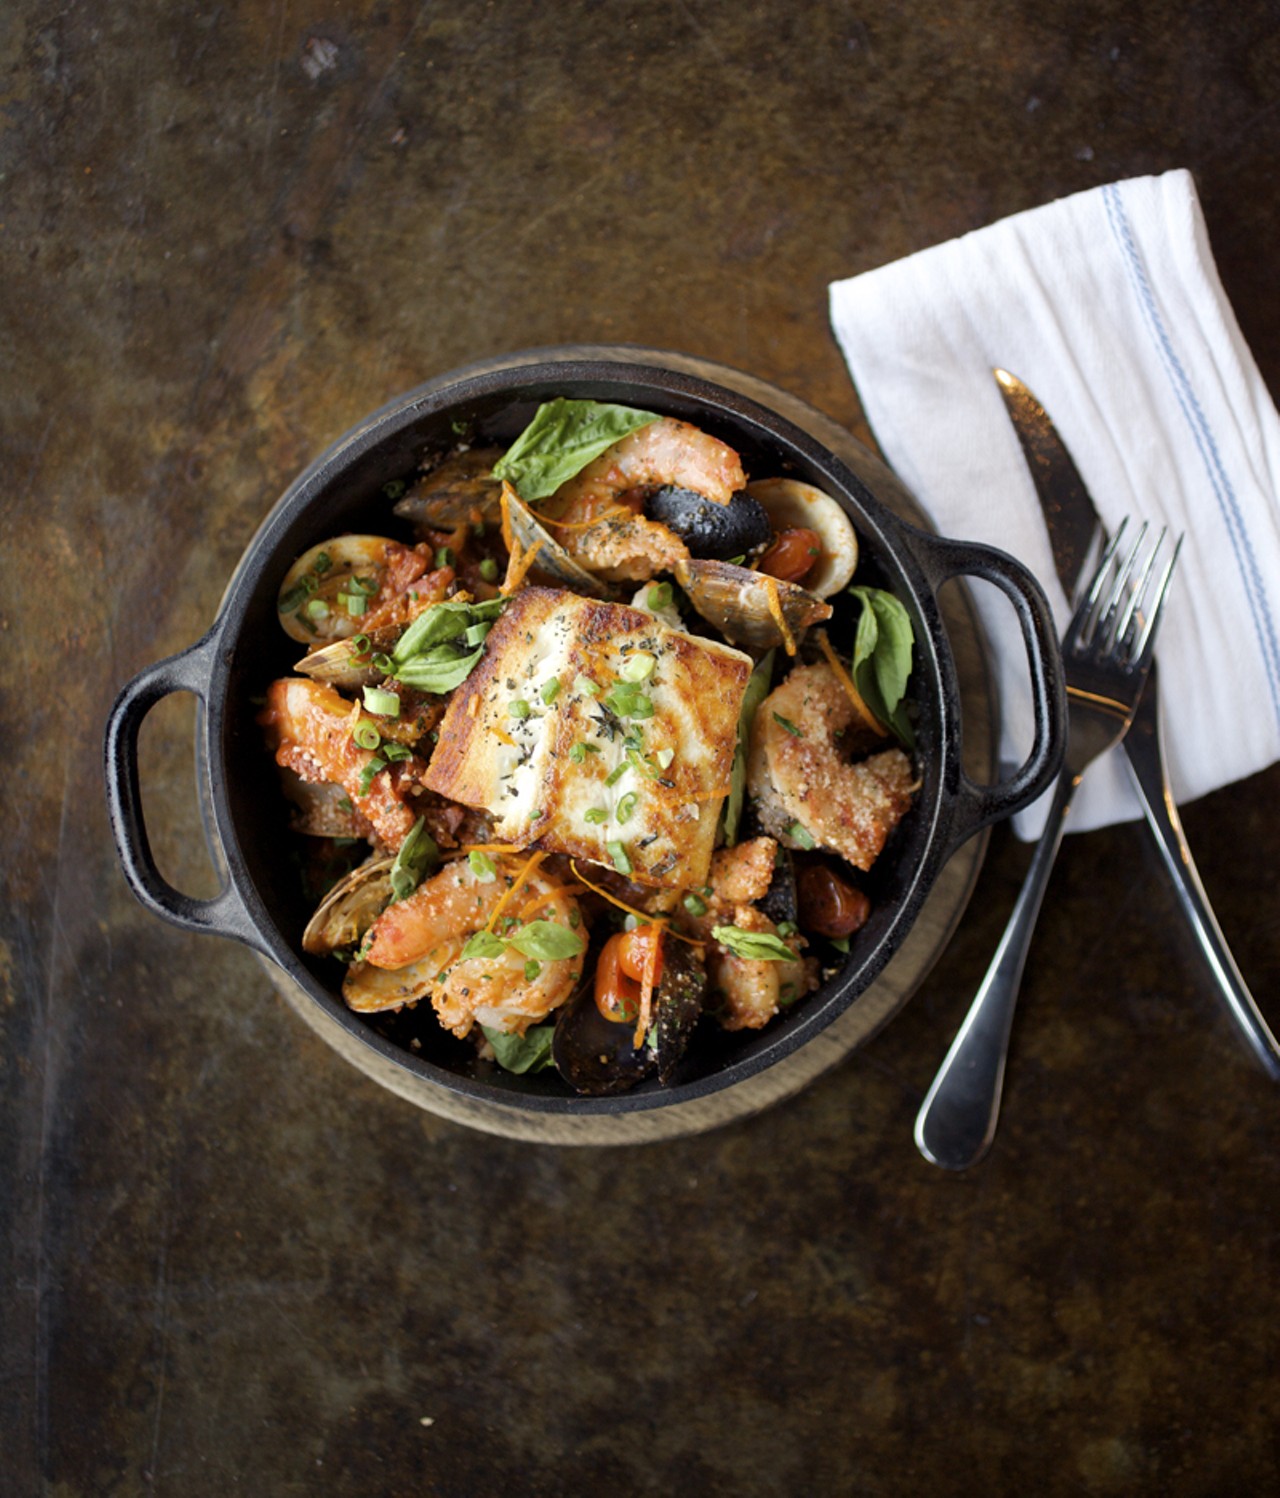 The Fisherman's Stew is prepared with Halibut, Clams, Mussels and Shrimp.